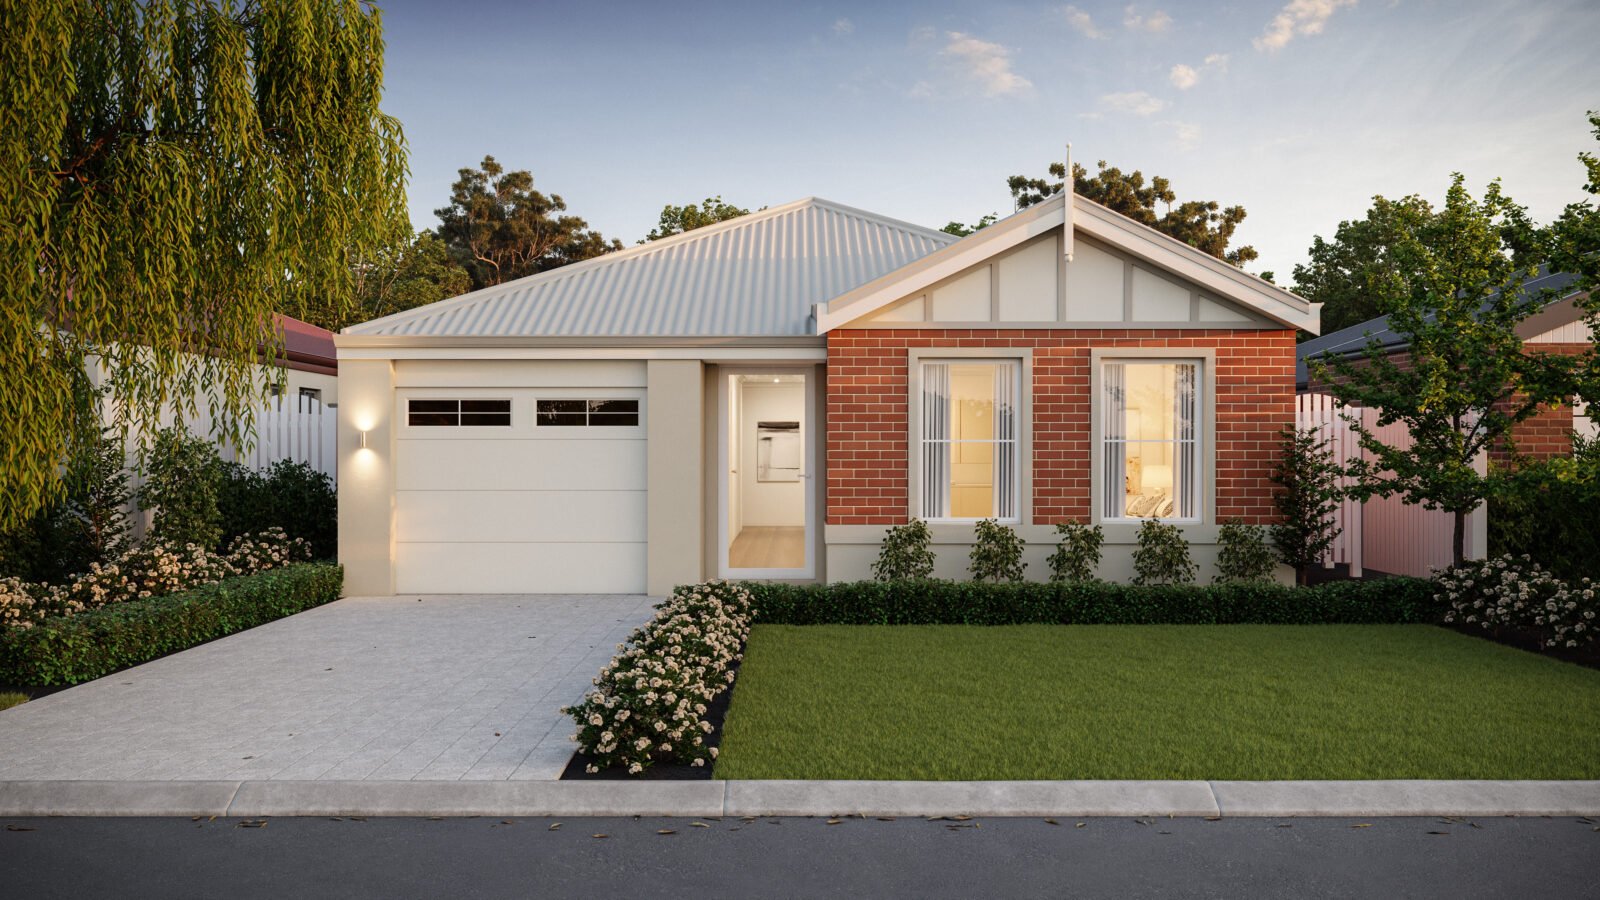 Plunkett Homes - Grevillea | Lifestyle - Gallery - Home Designs Plunkett Homes Lifestyle Grevillea Plk 125M Or Less